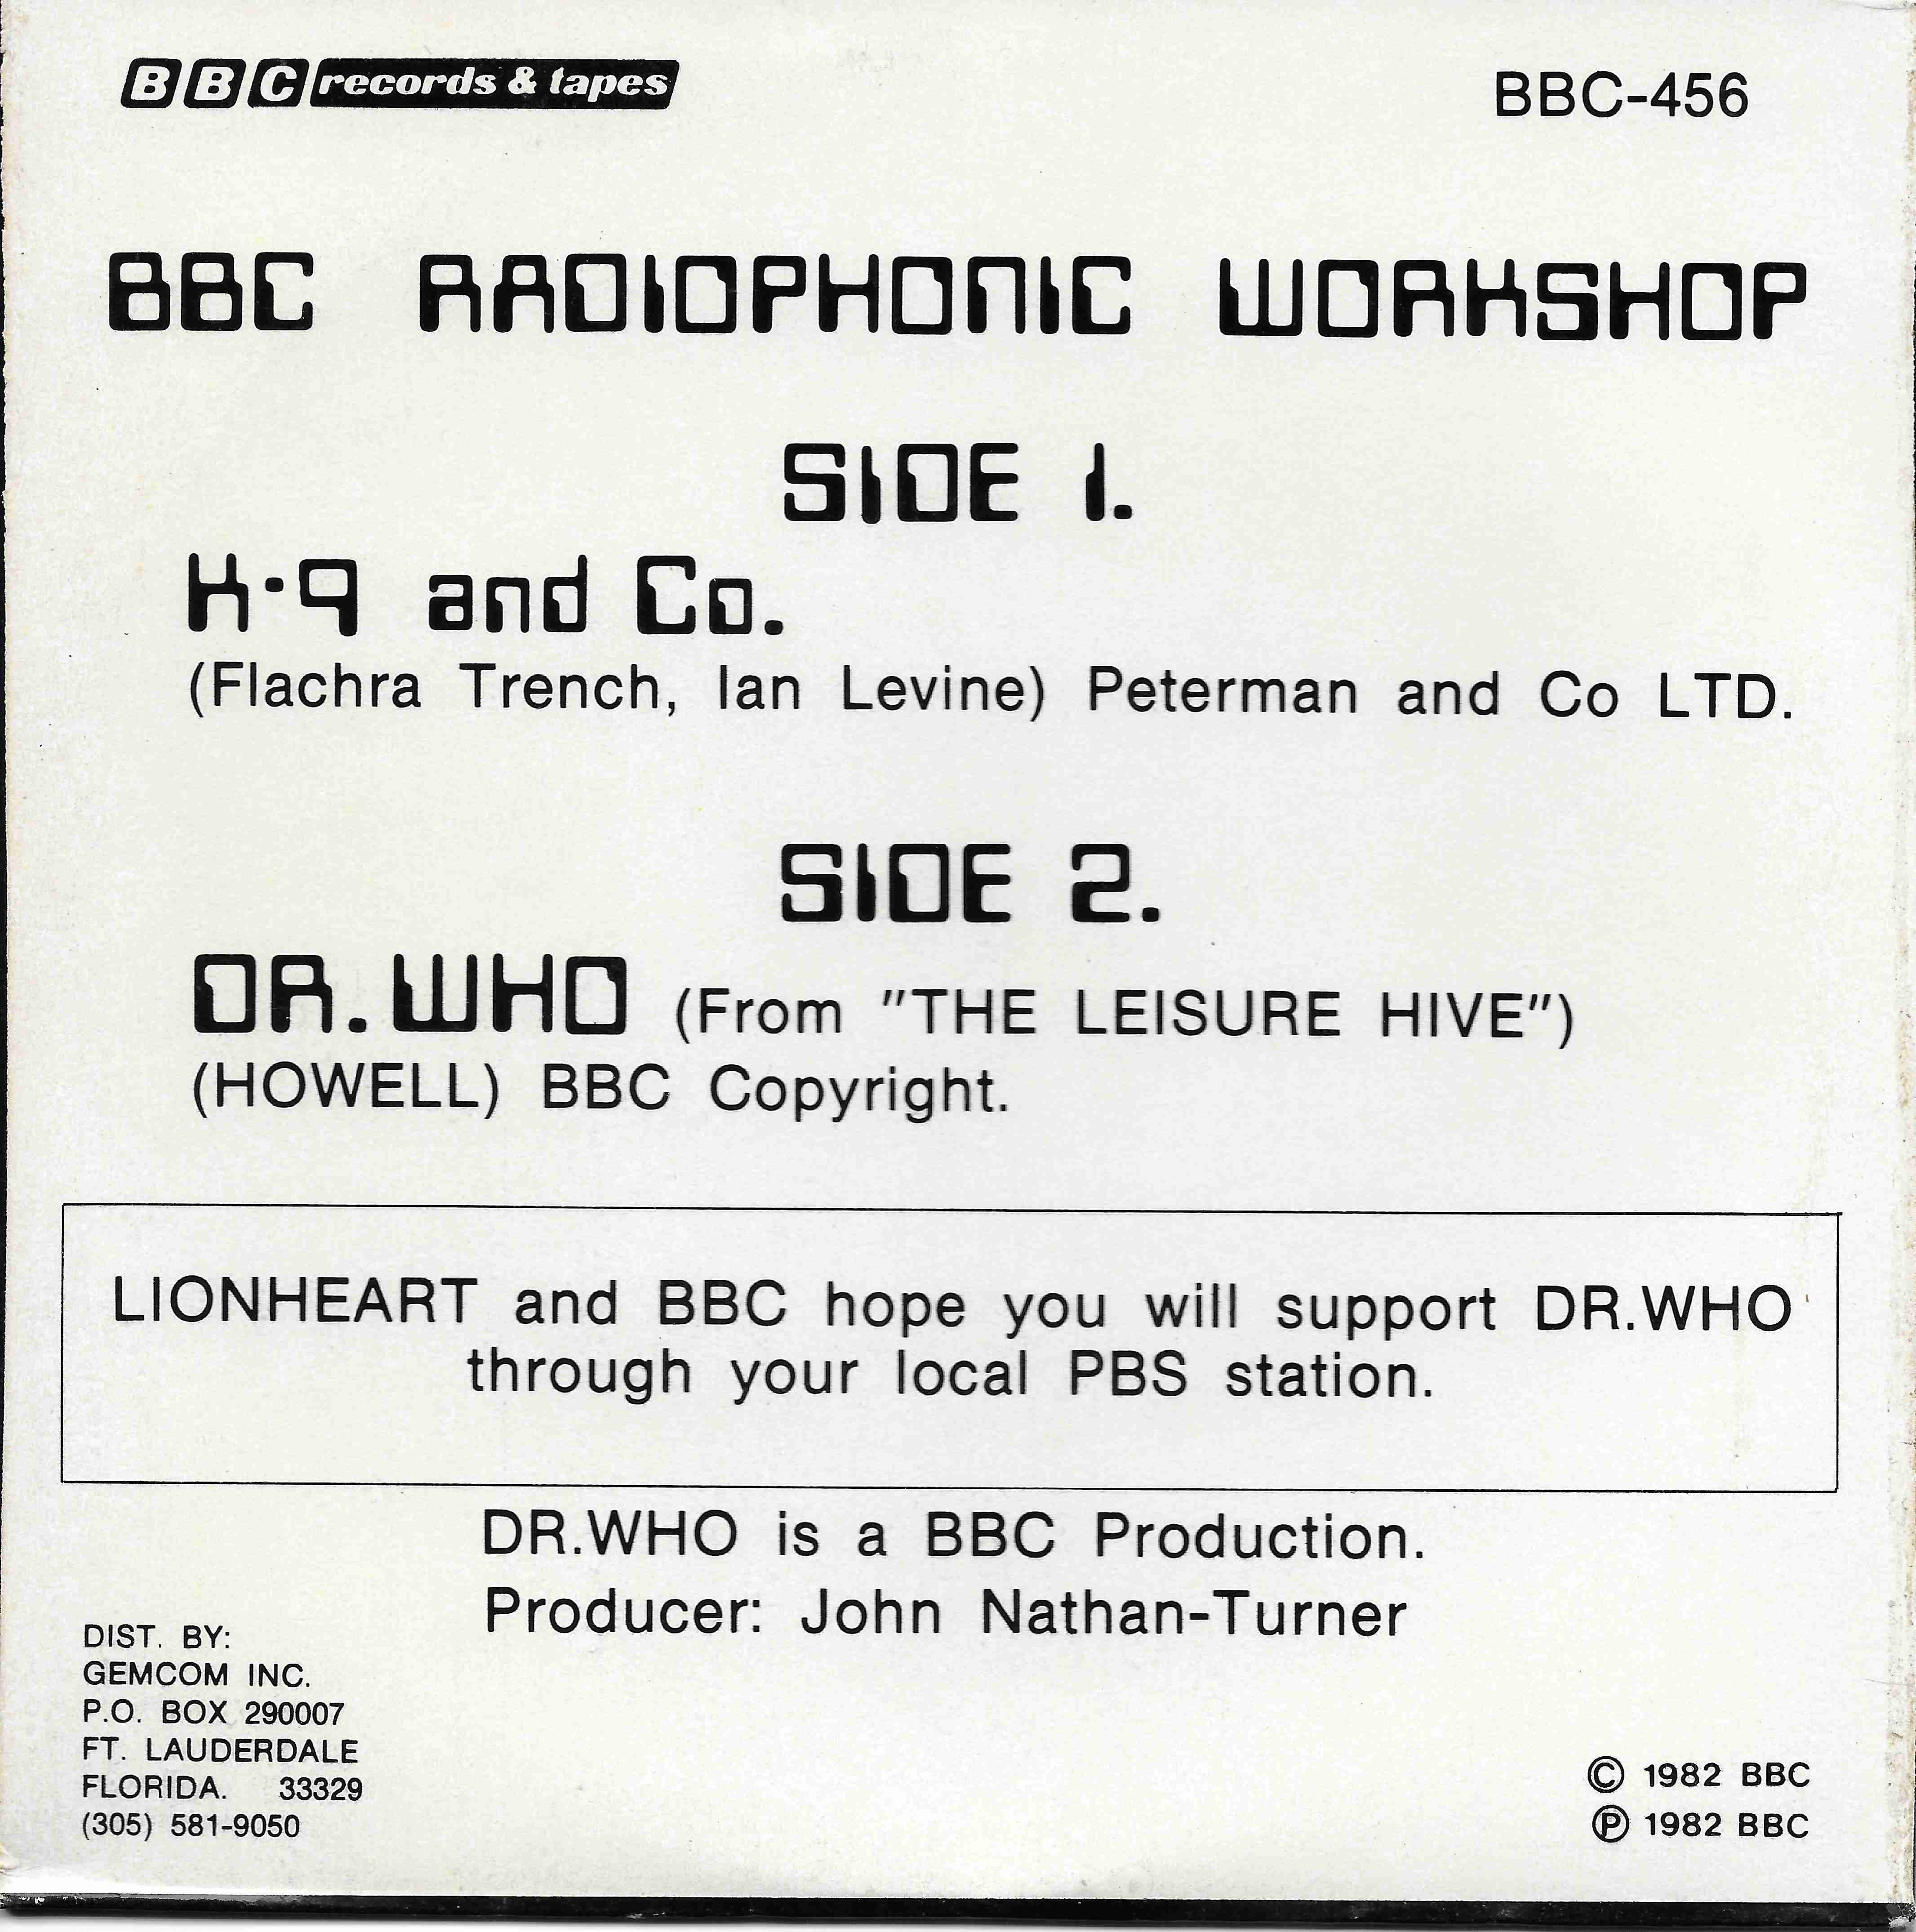 Picture of BBC - 456 K-9 and Co. by artist Flachra Trench / Ian Levine from the BBC records and Tapes library